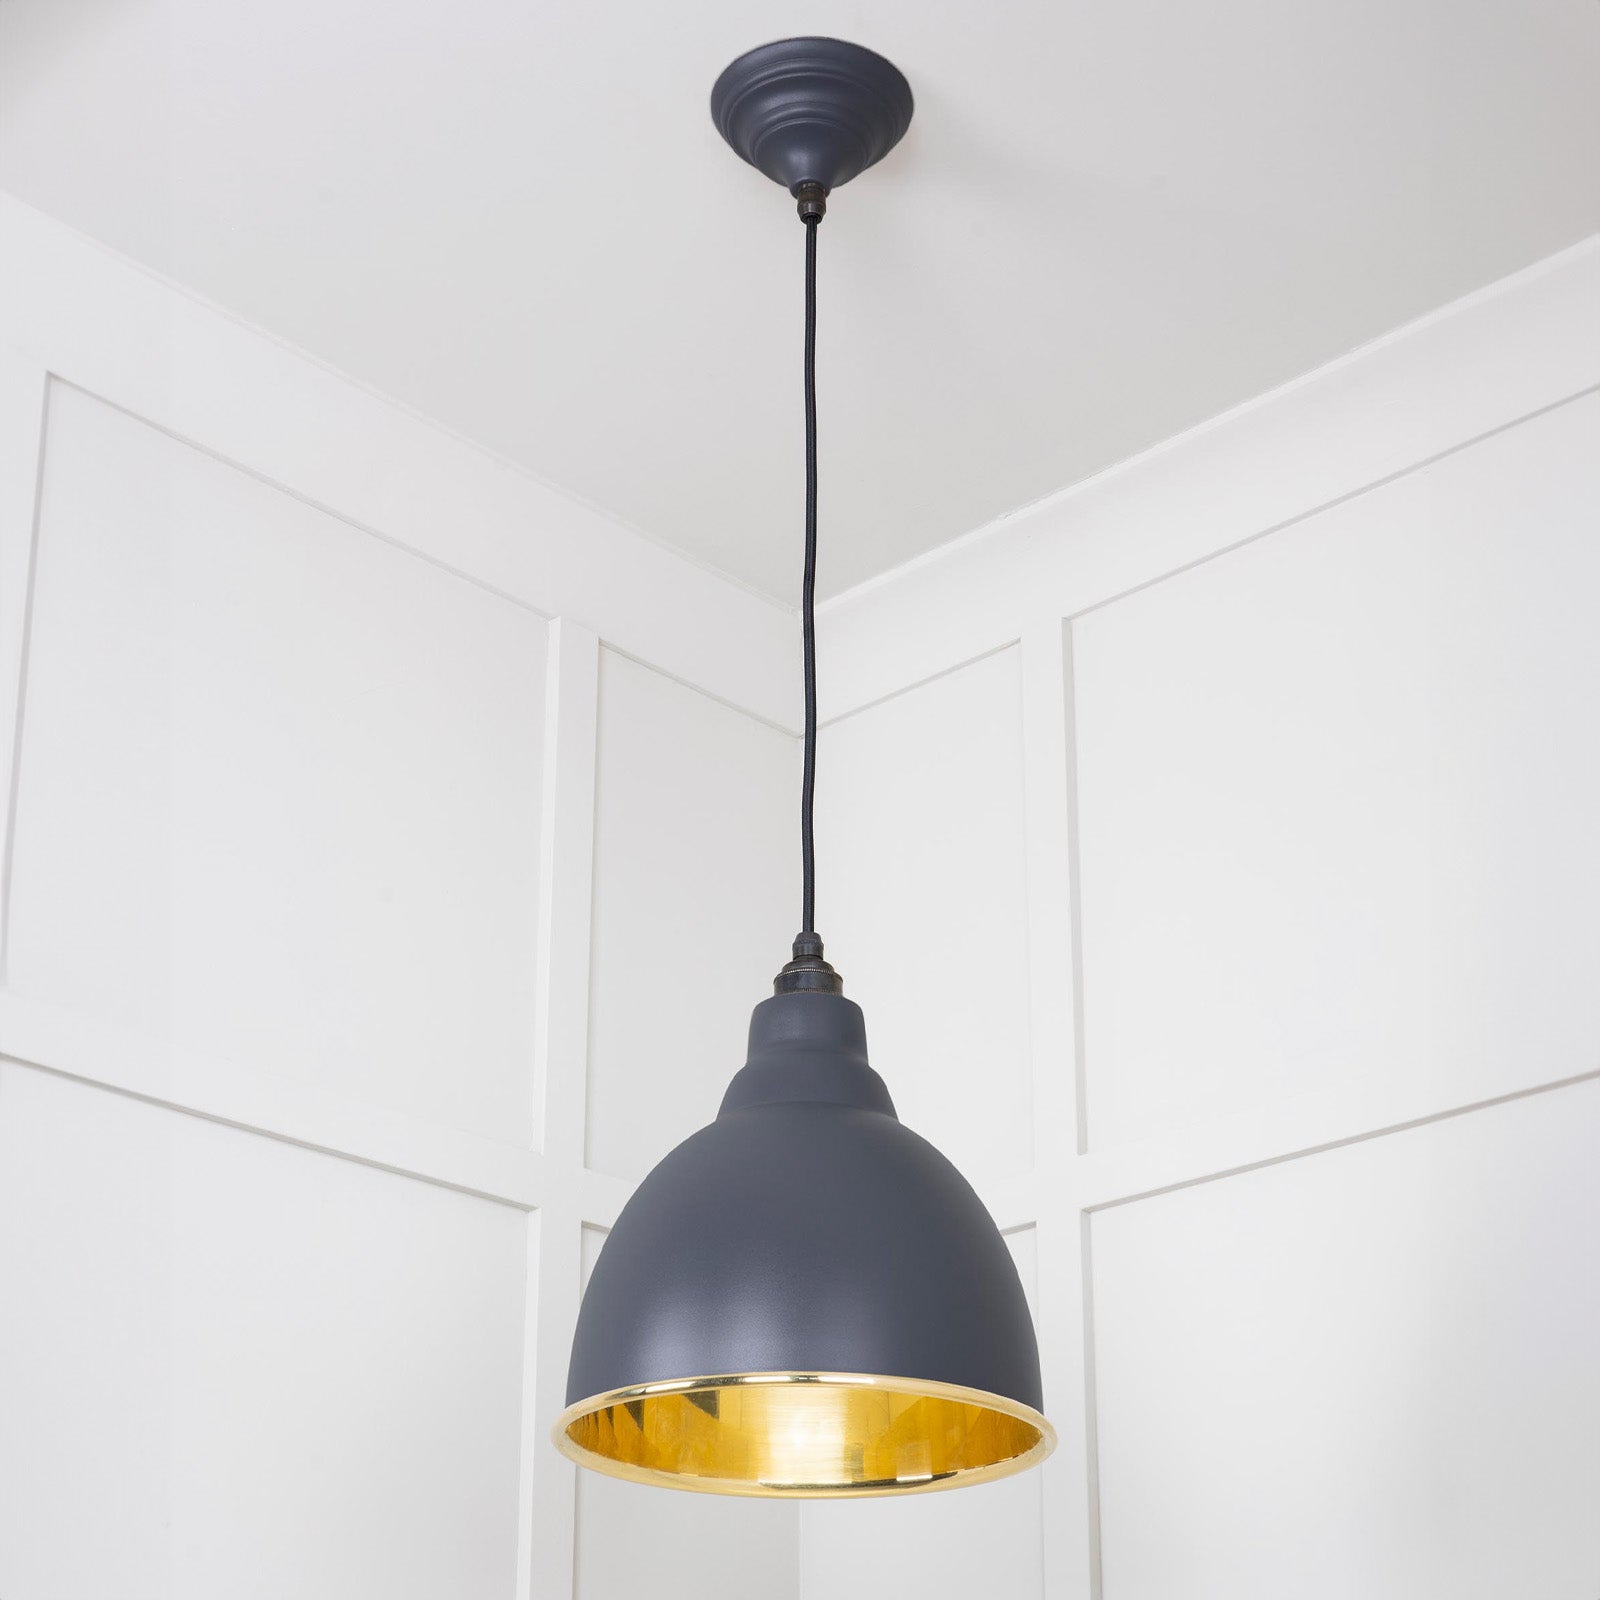 SHOW Full Image of Hanging Brindley Ceiling Light in Slate